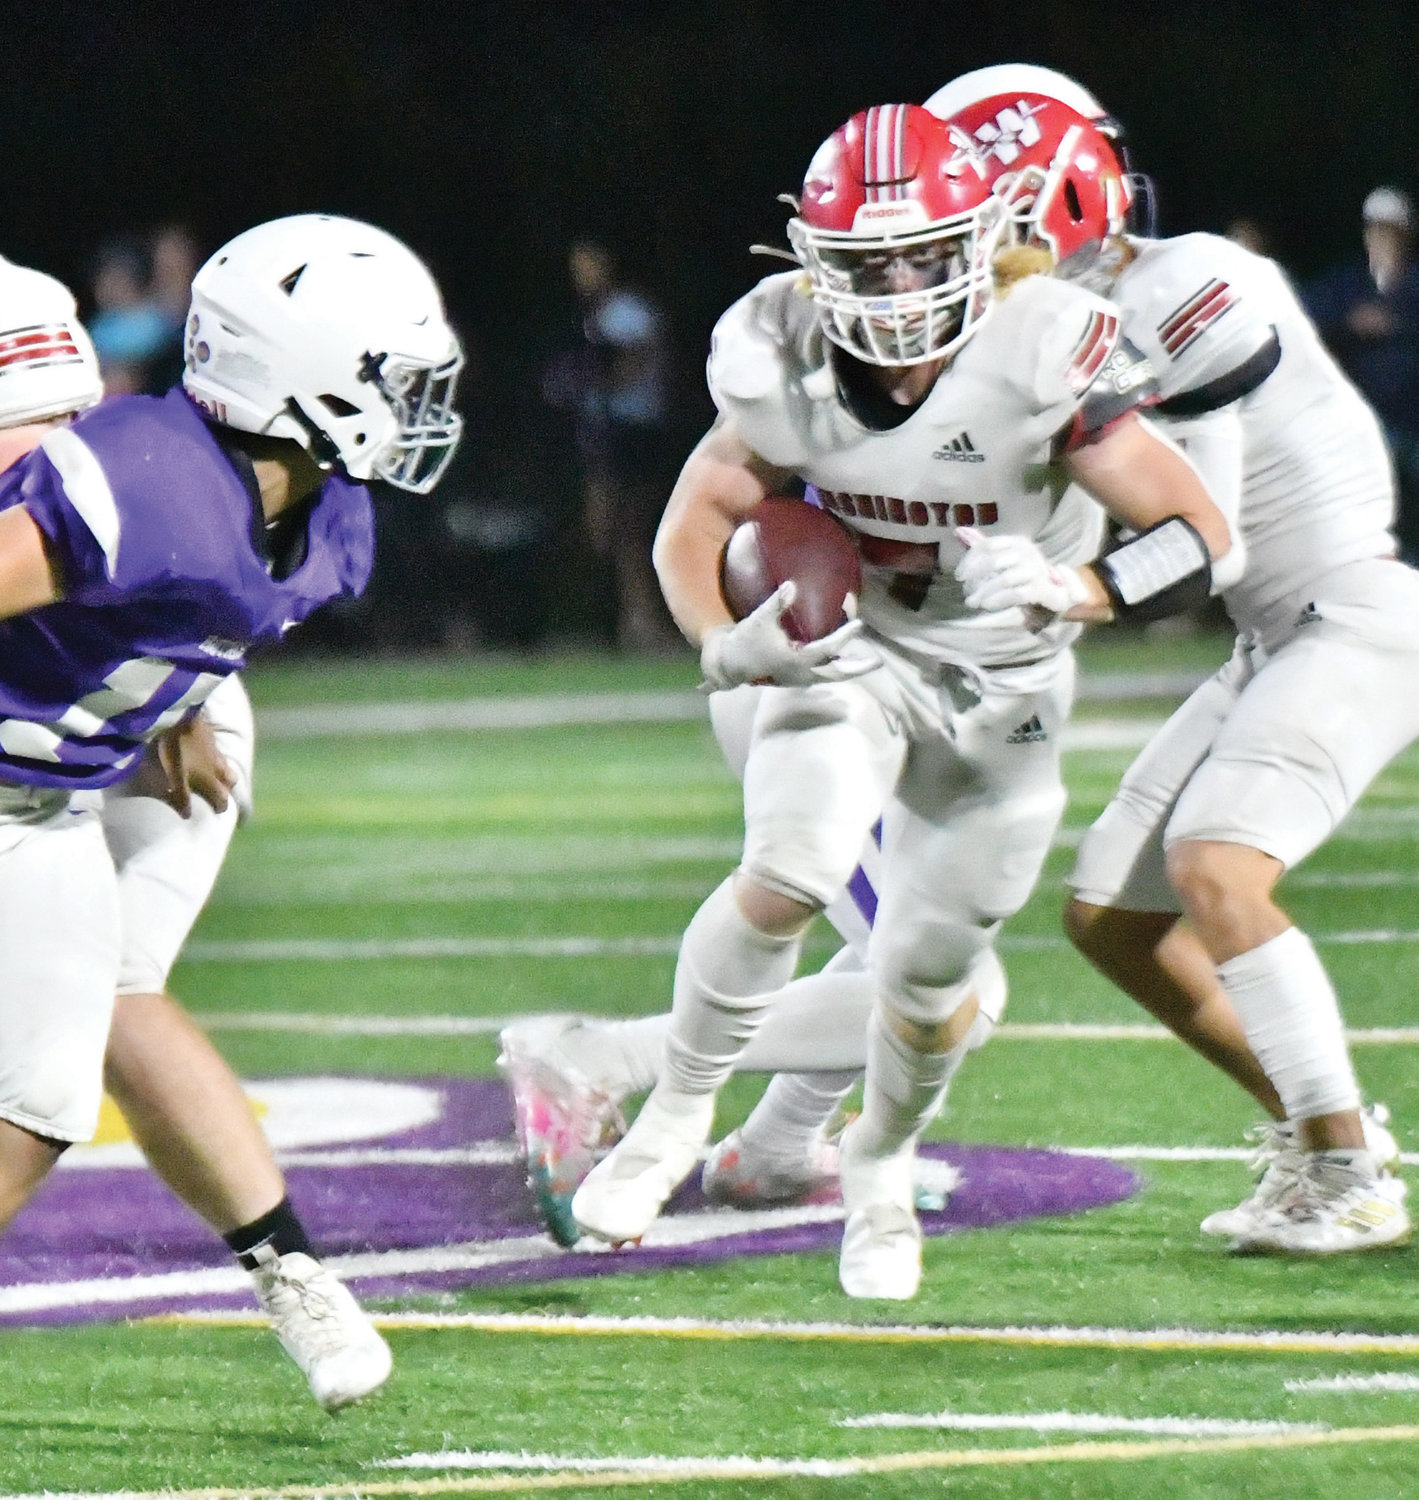 Washington senior Cole Scott runs through a wide-open hole during the Warriors’ 42-7 win over CCS. Scott rushed the pigskin 16 times for 93 yards and a 10-yard touchdown in the game.